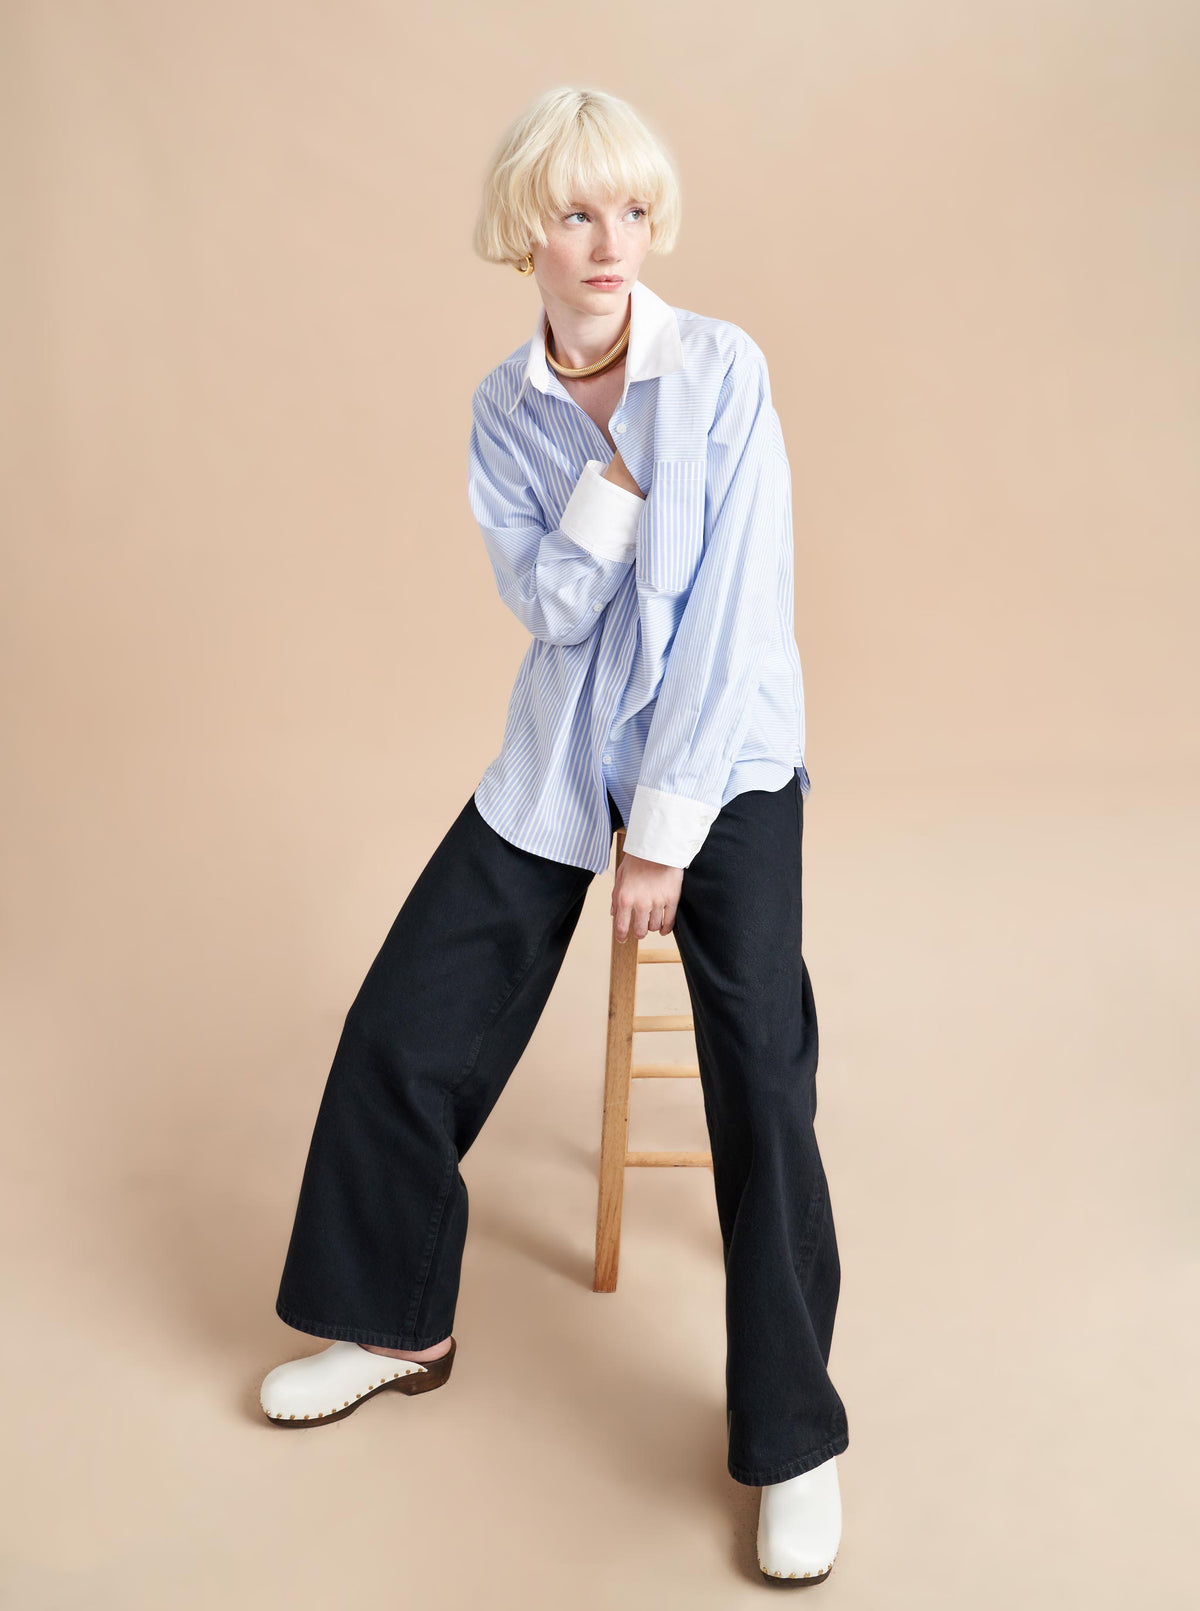 A staple for your closet, whether it lives in your weekday, workwear collection or thrives on the weekend unbuttoned, with rolled up cuffs, this shirt with contrast cuffs and collar is seasonless; equally great under a sweater or unbuttoned over a tank. For a cropped version, see our Cropped Gemma Shirt.